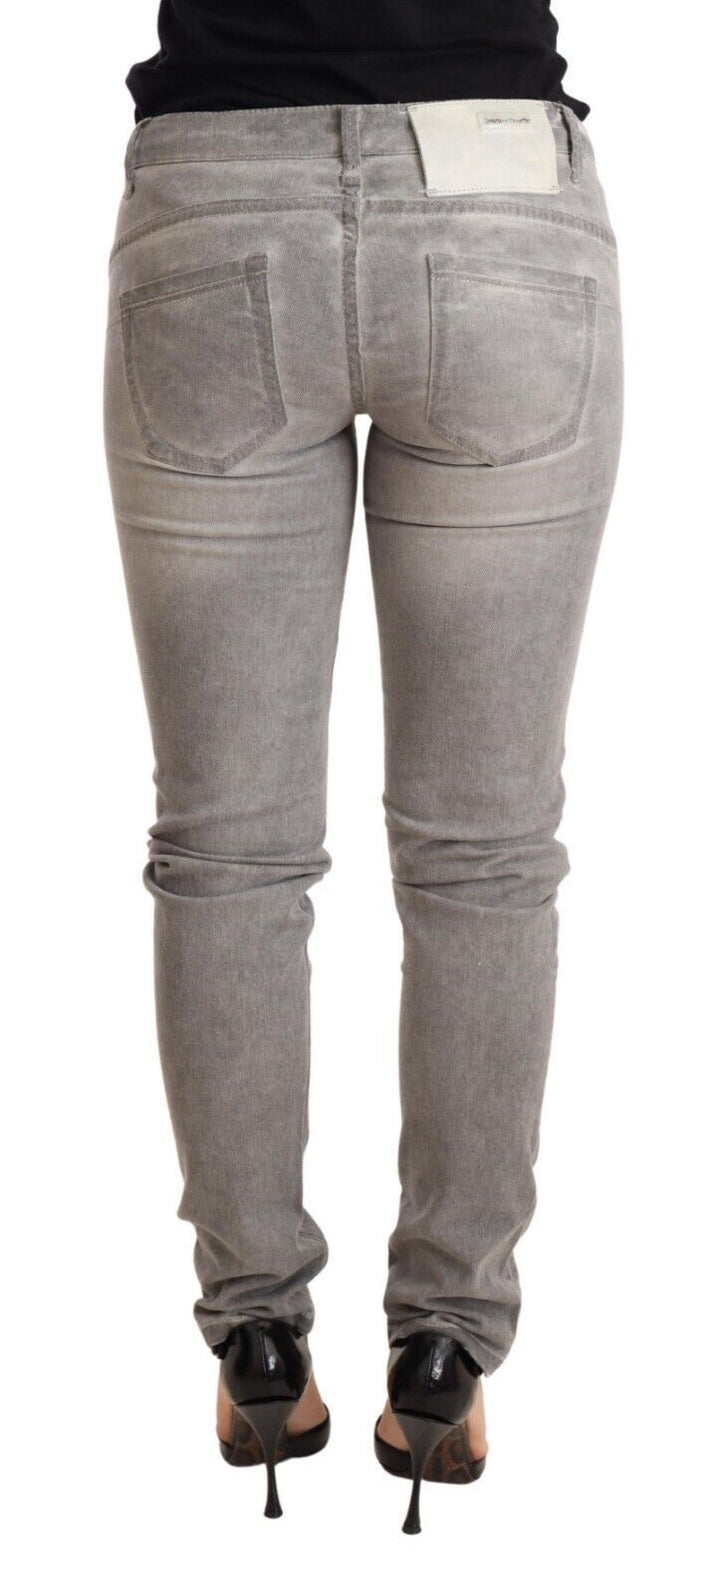 Acht Chic Gray Washed Slim Fit Cotton Jeans